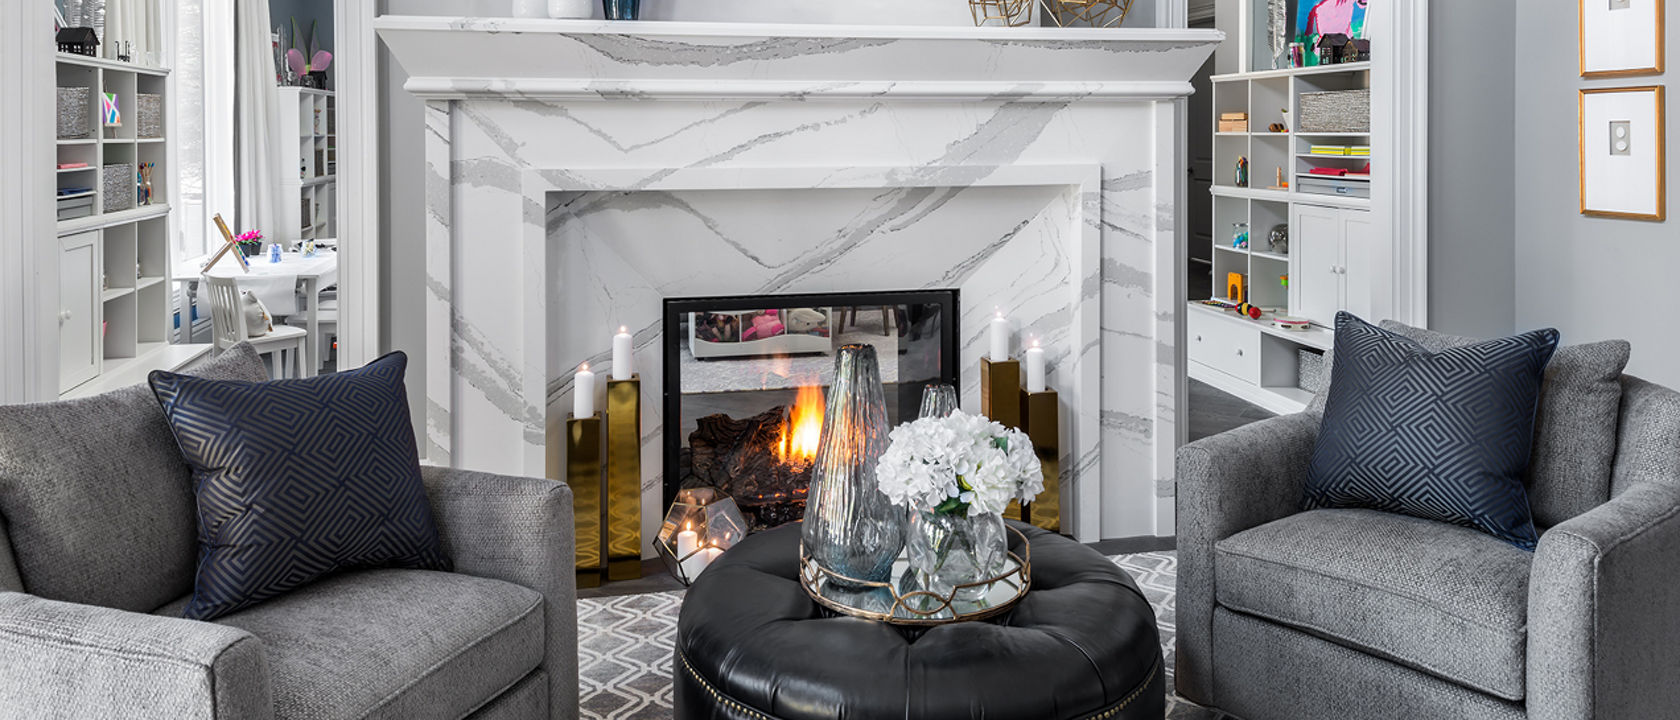 a stunning living room with cool tones, a white and gray veined quartz fireplace, gray armchairs, a black ottoman with a serving tray on top, and gold, blue and white accents throughout. 